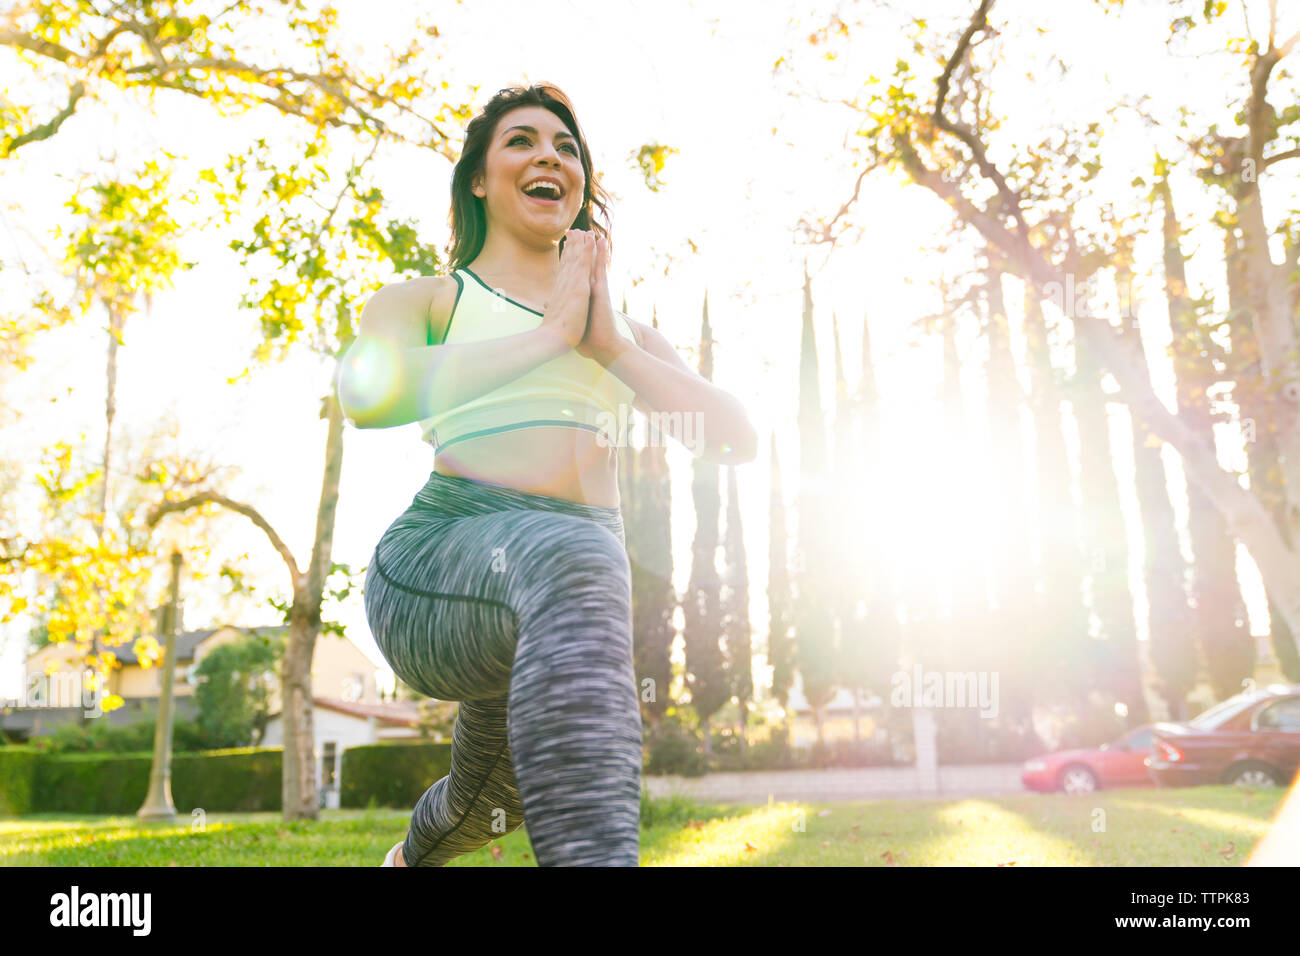 Low angle view of cheerful woman practicing yoga while exercising in park during sunny day Stock Photo